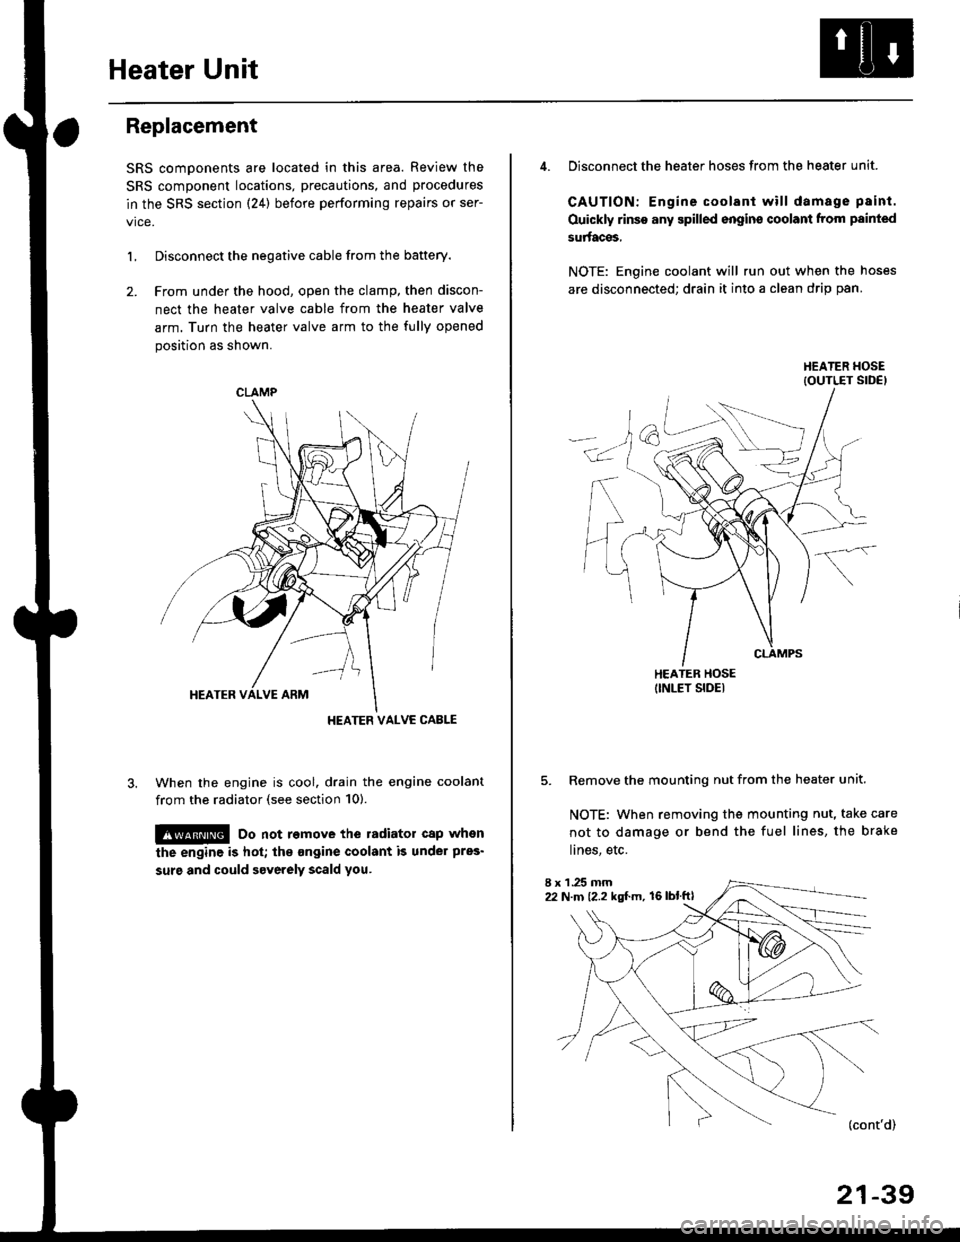 HONDA CIVIC 1998 6.G Manual PDF Heater Unit
Replacement
SRS components are located in this area. Review the
SRS component locations, precautions, and procedures
in the SRS section {24} before performing repairs or ser-
L Disconnect 